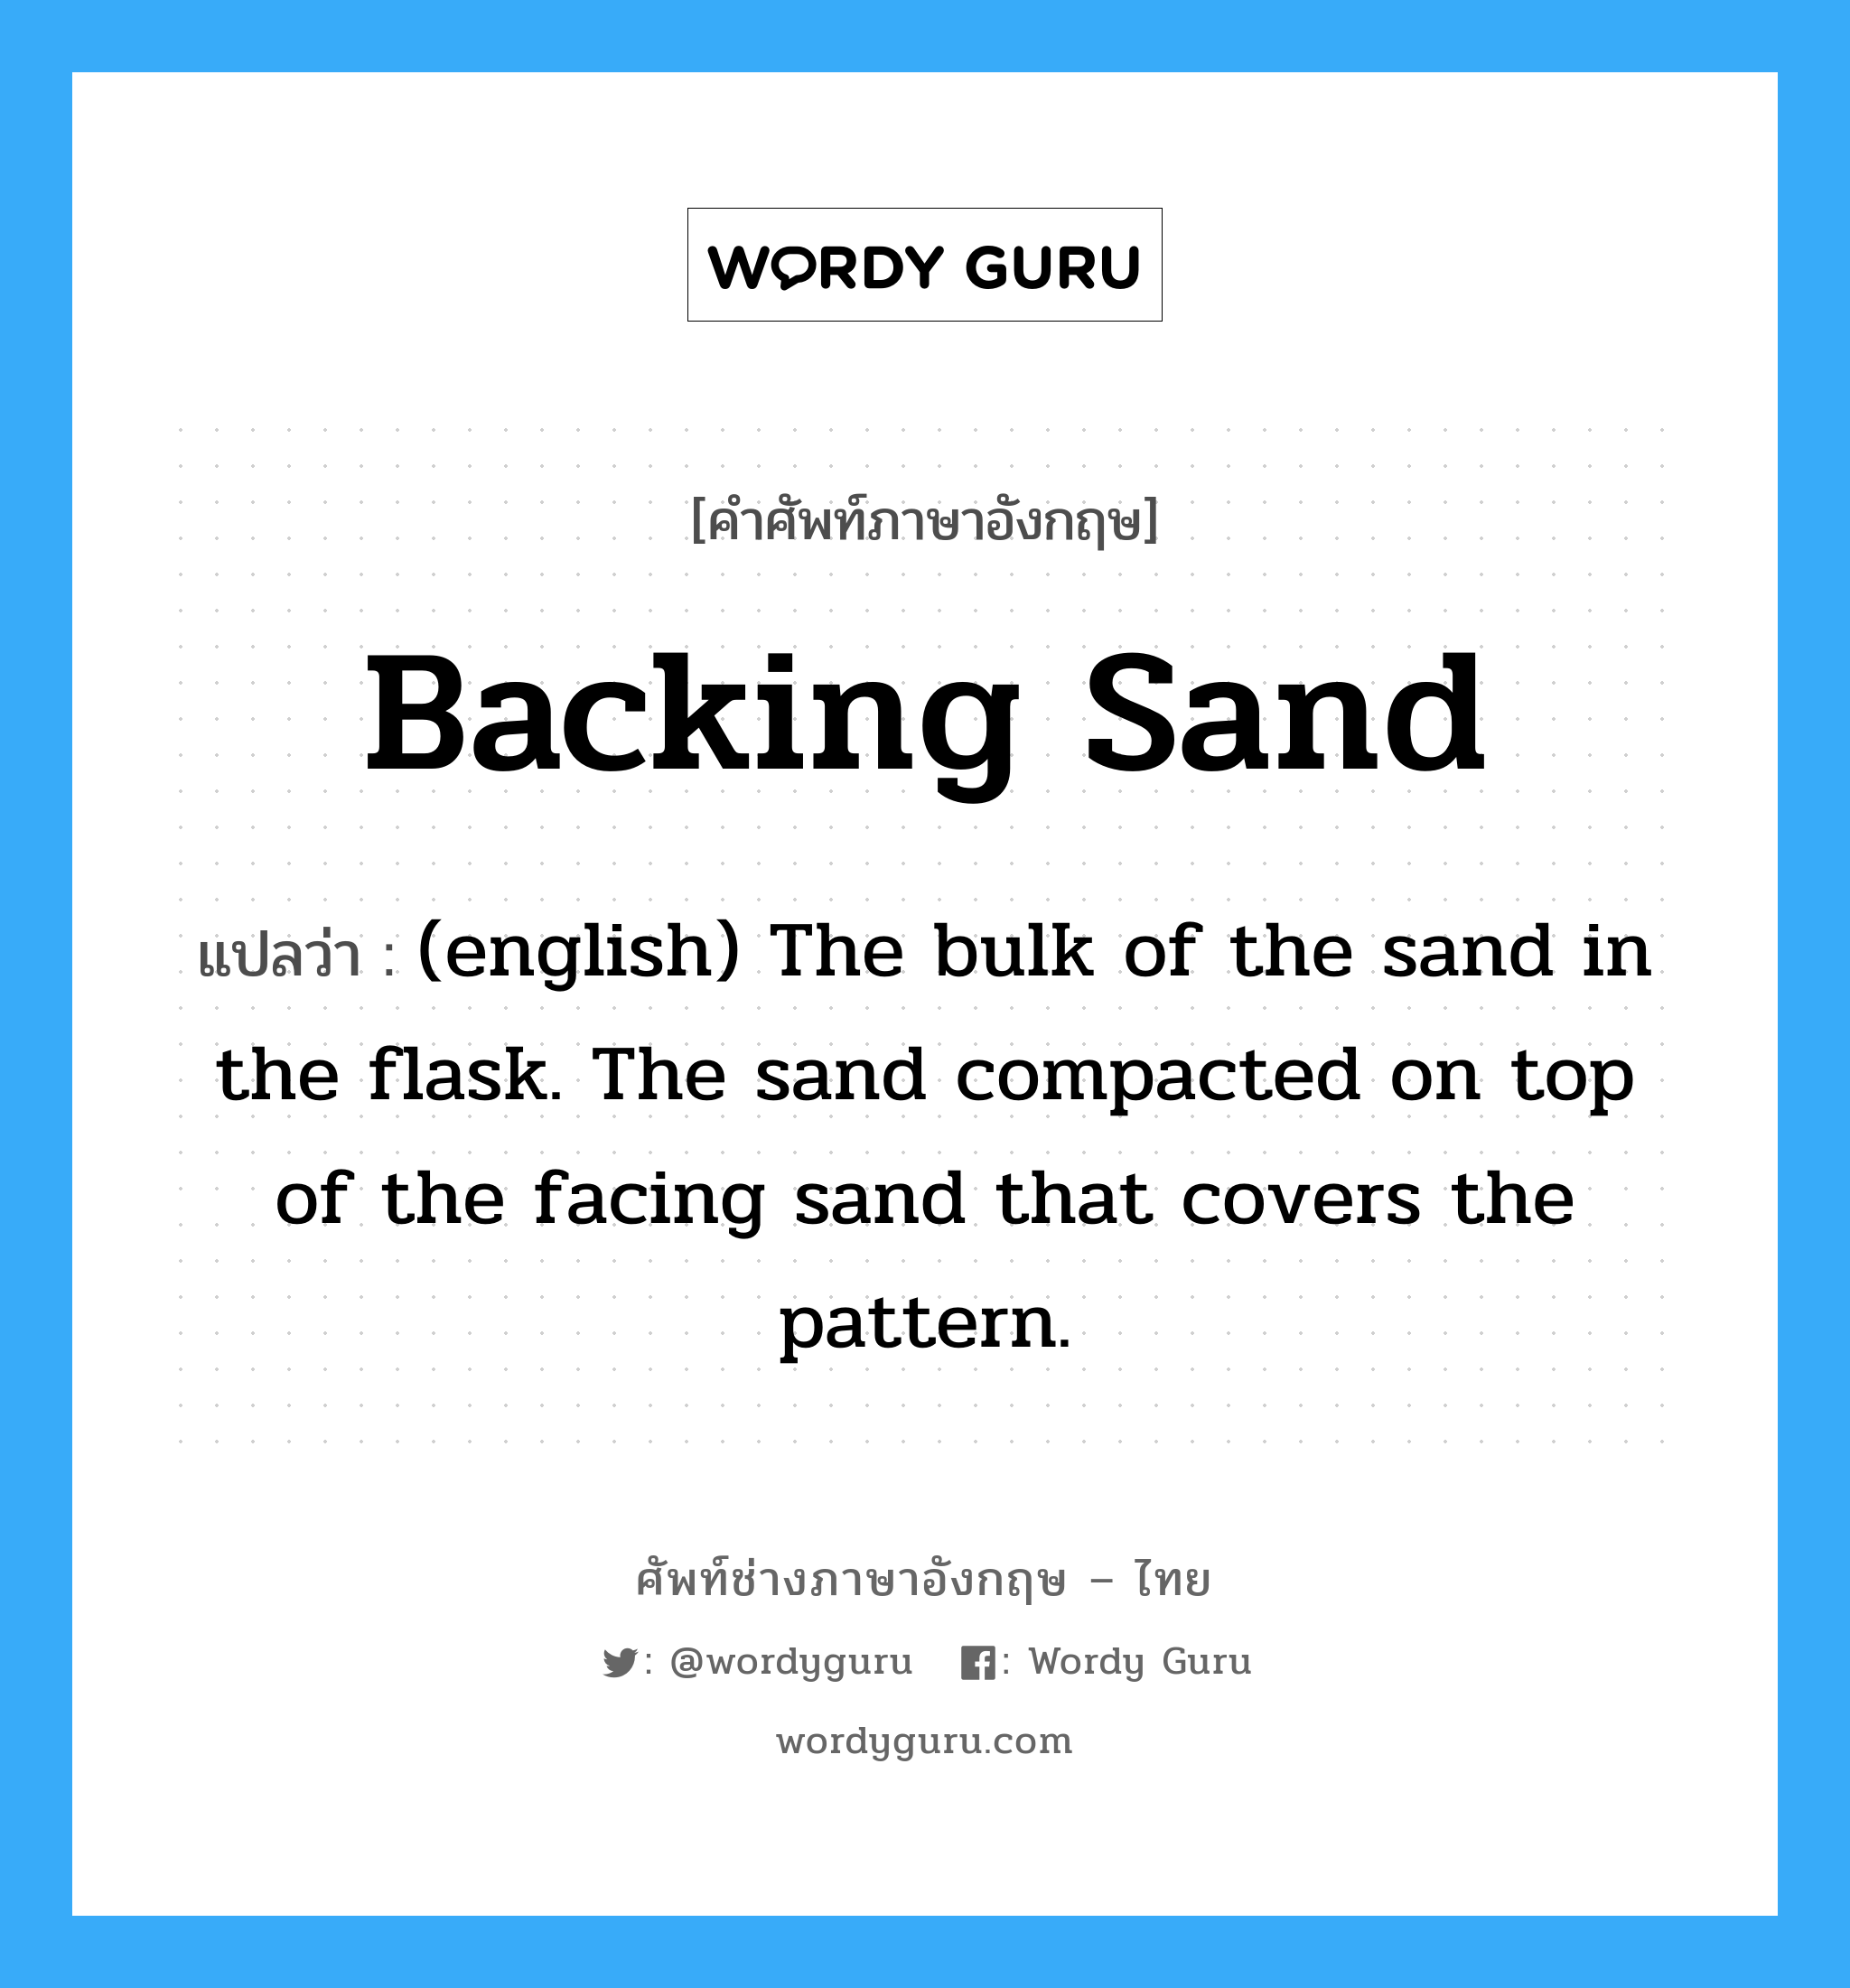 (english) The bulk of the sand in the flask. The sand compacted on top of the facing sand that covers the pattern. ภาษาอังกฤษ?, คำศัพท์ช่างภาษาอังกฤษ - ไทย (english) The bulk of the sand in the flask. The sand compacted on top of the facing sand that covers the pattern. คำศัพท์ภาษาอังกฤษ (english) The bulk of the sand in the flask. The sand compacted on top of the facing sand that covers the pattern. แปลว่า Backing Sand